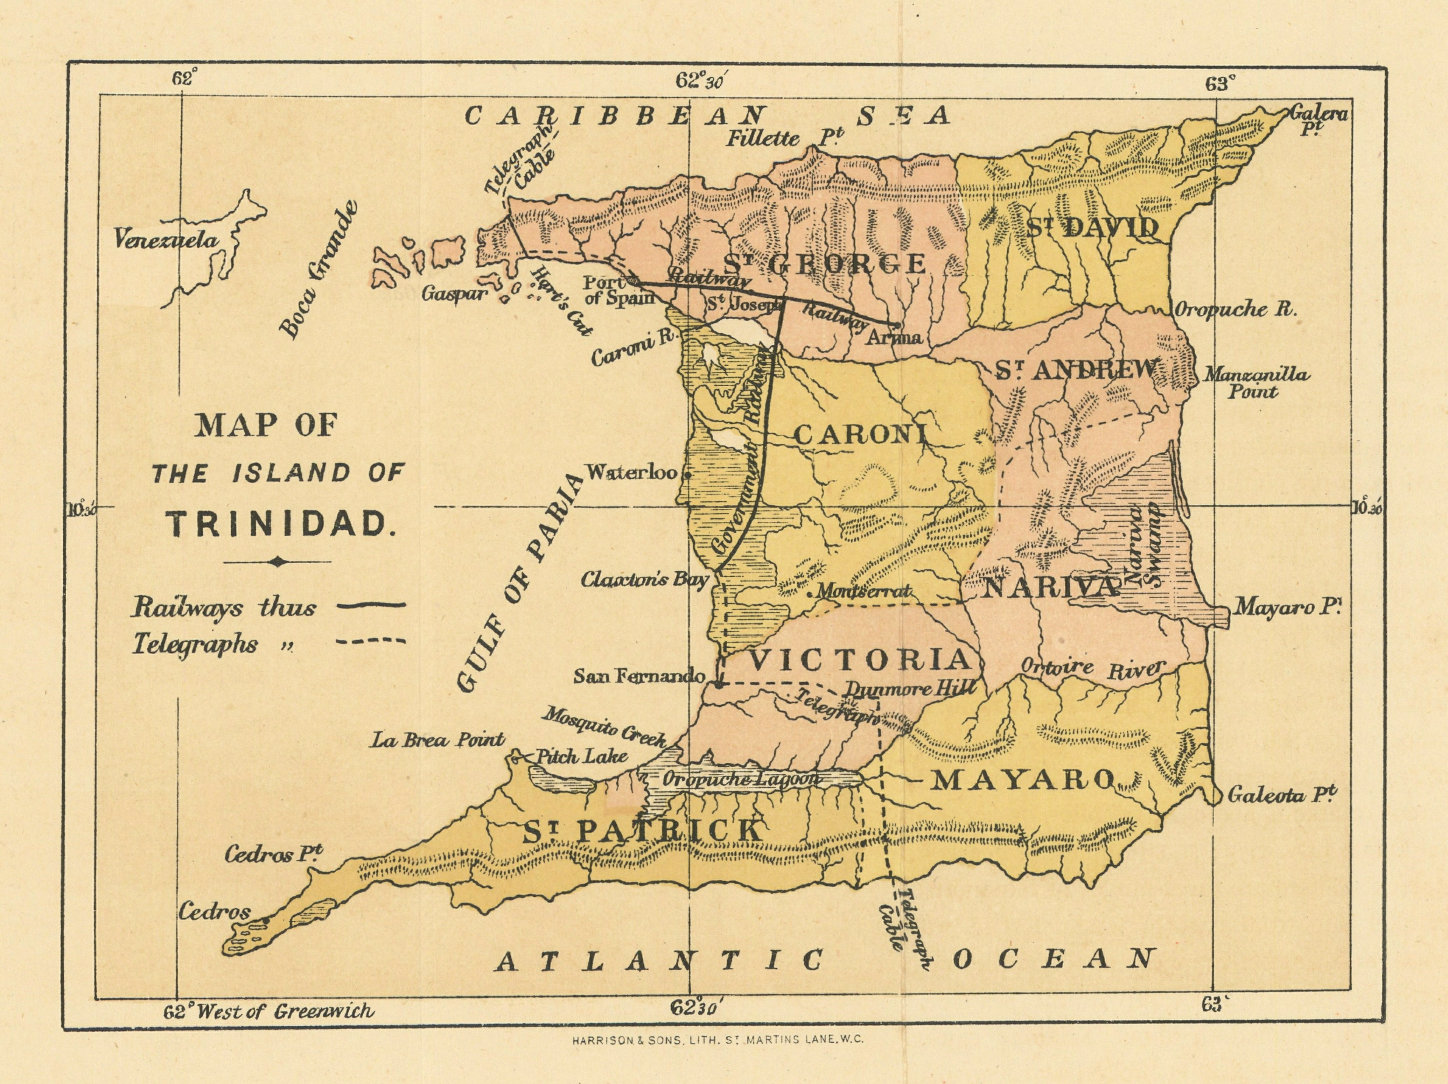 Associate Product Map of the island of Trinidad. Counties. WASHINGTON EVES 1889 old antique